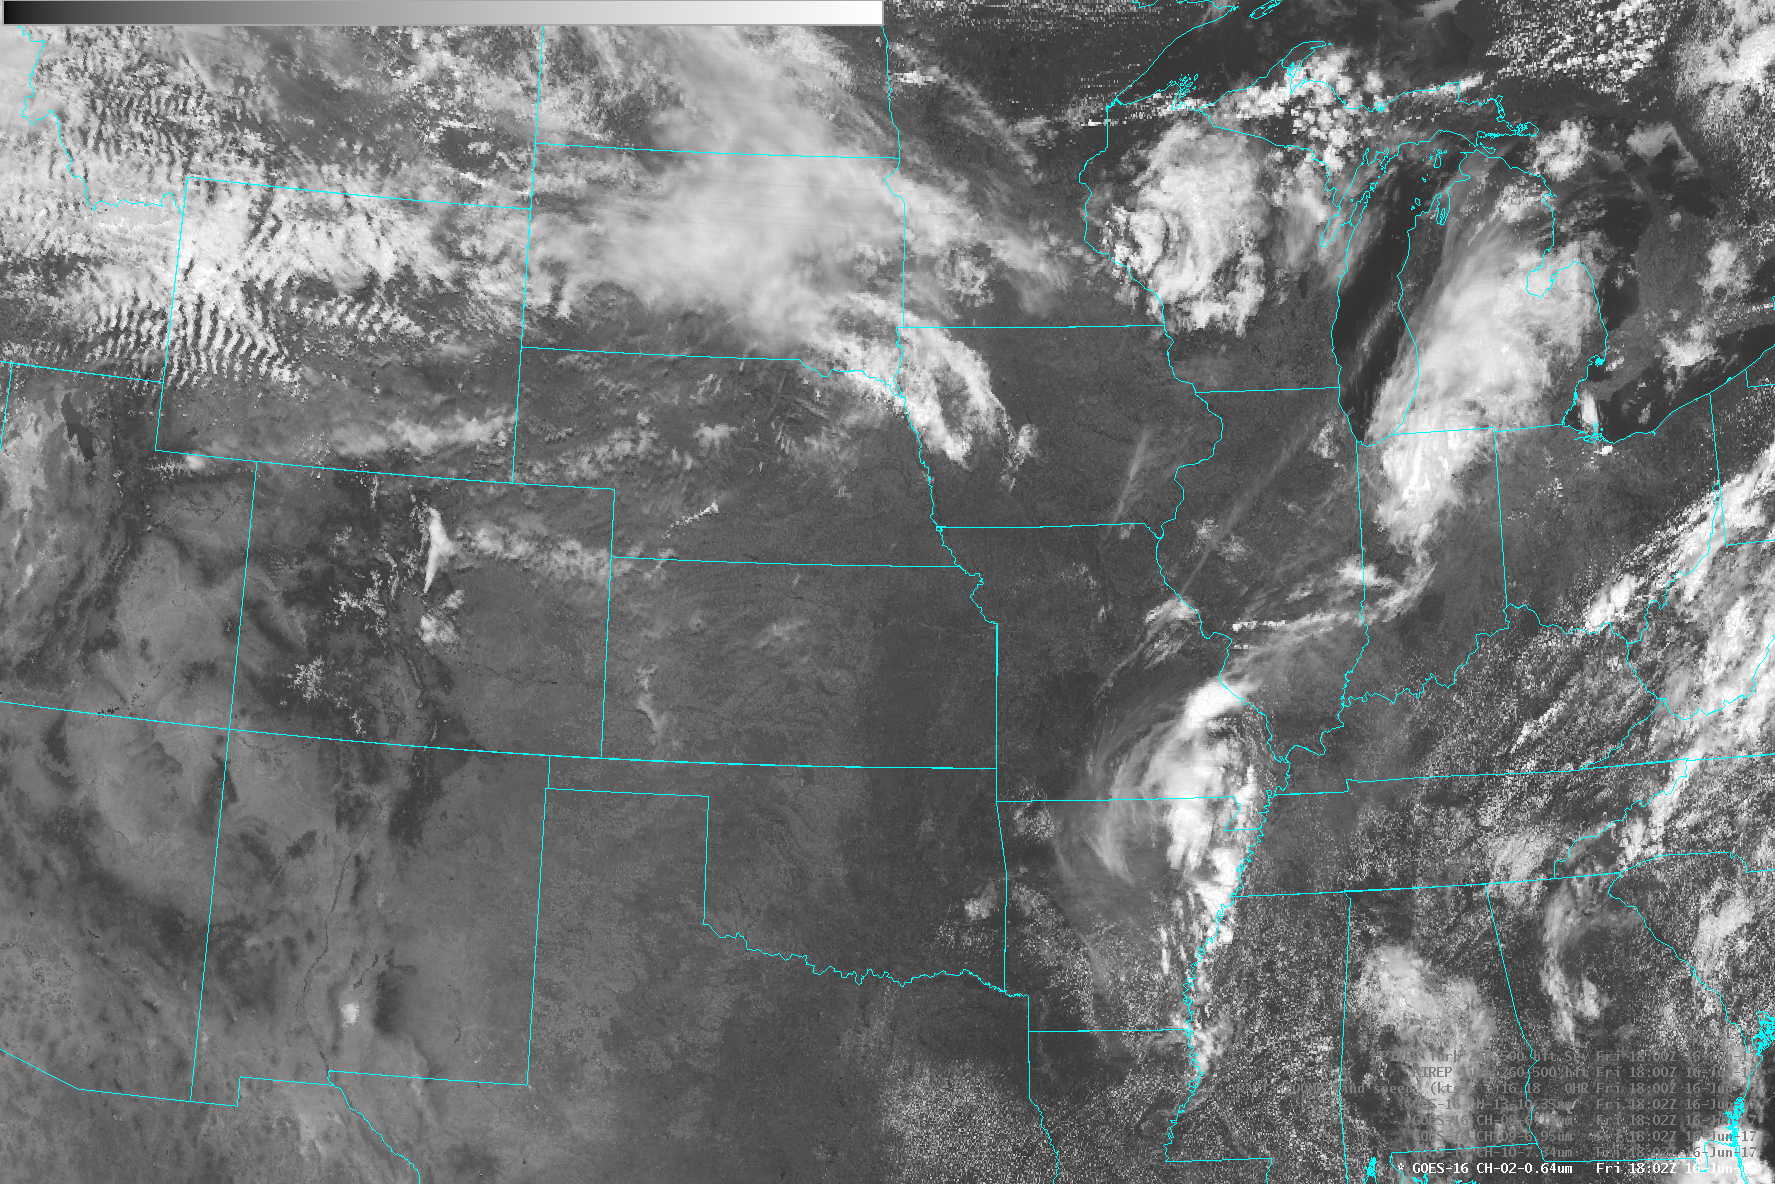 GOES-16 Visible Imagery [click to play animated GIF]